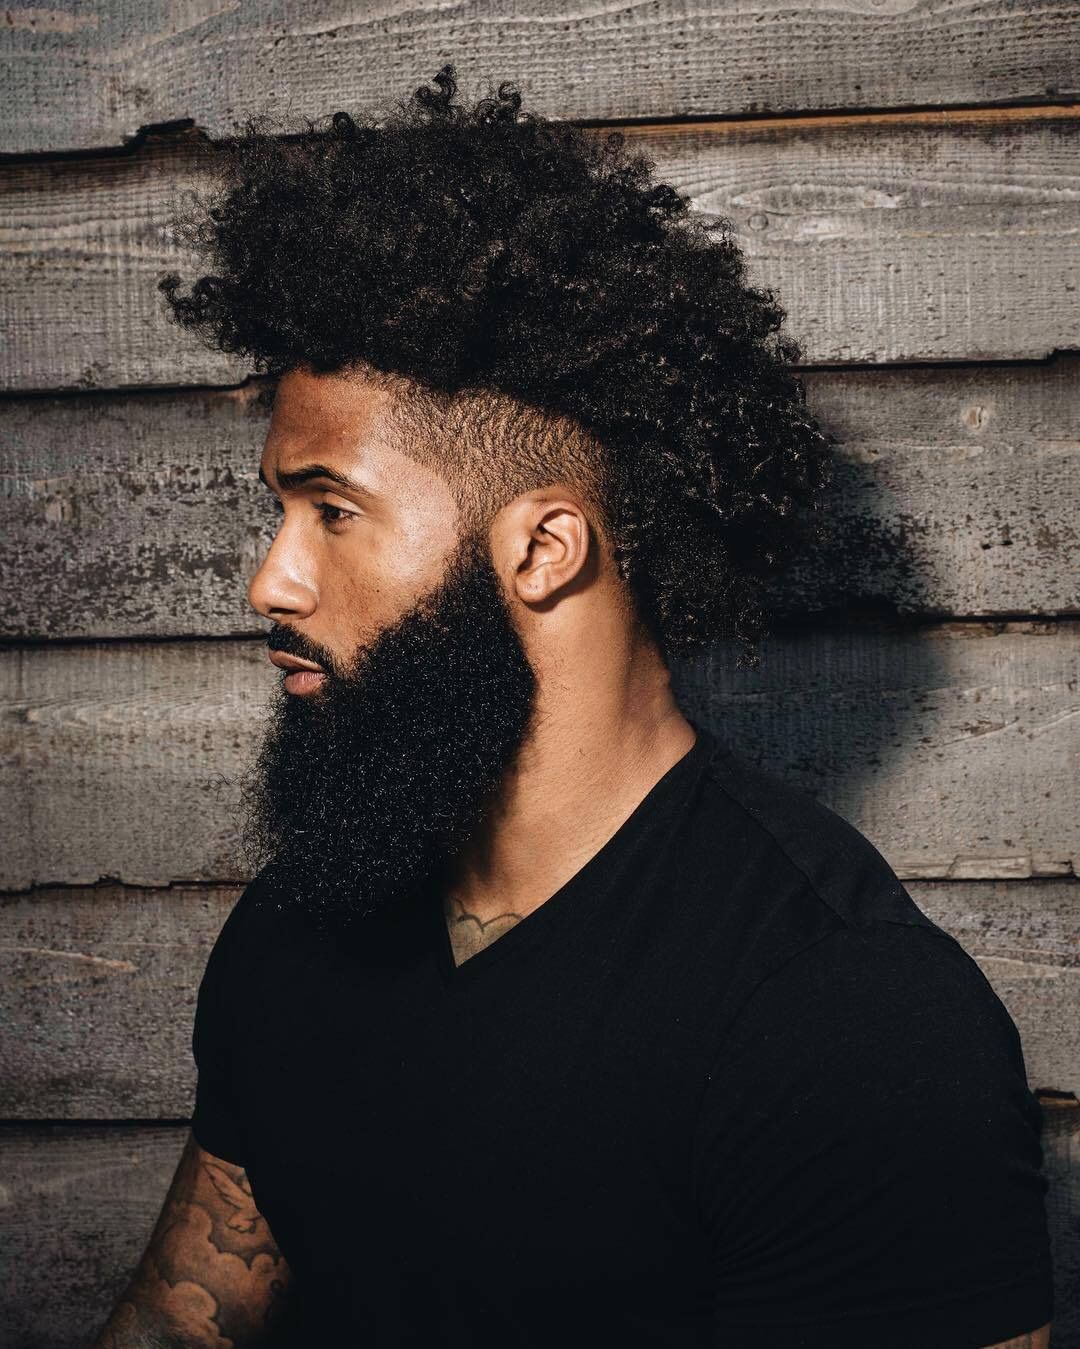 Black Men Beard Styles - Curly with Fade